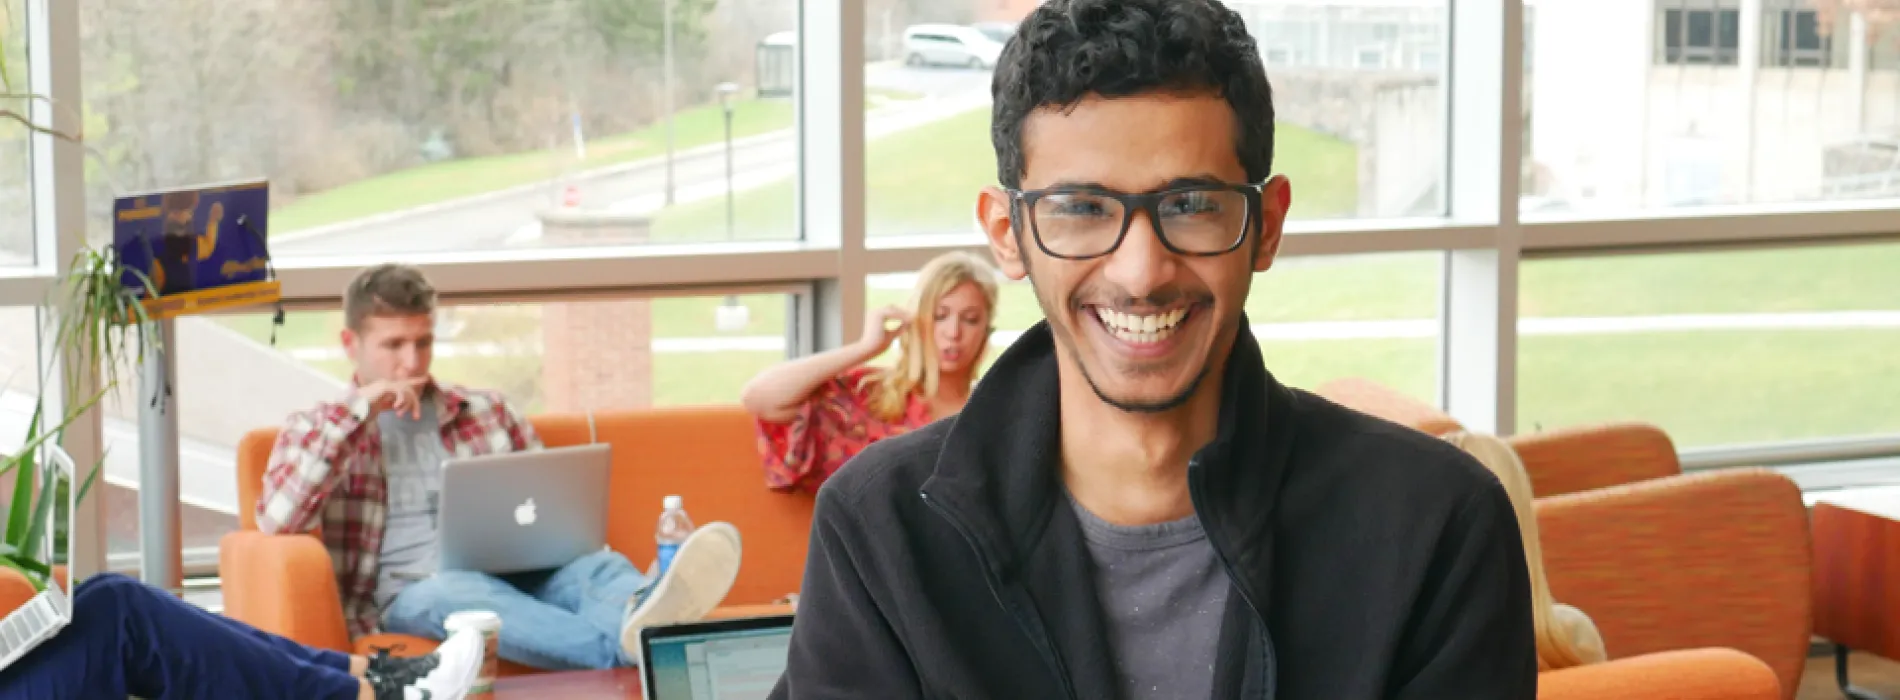 Male international student laughing as friends study behind him at Student Leadership Center